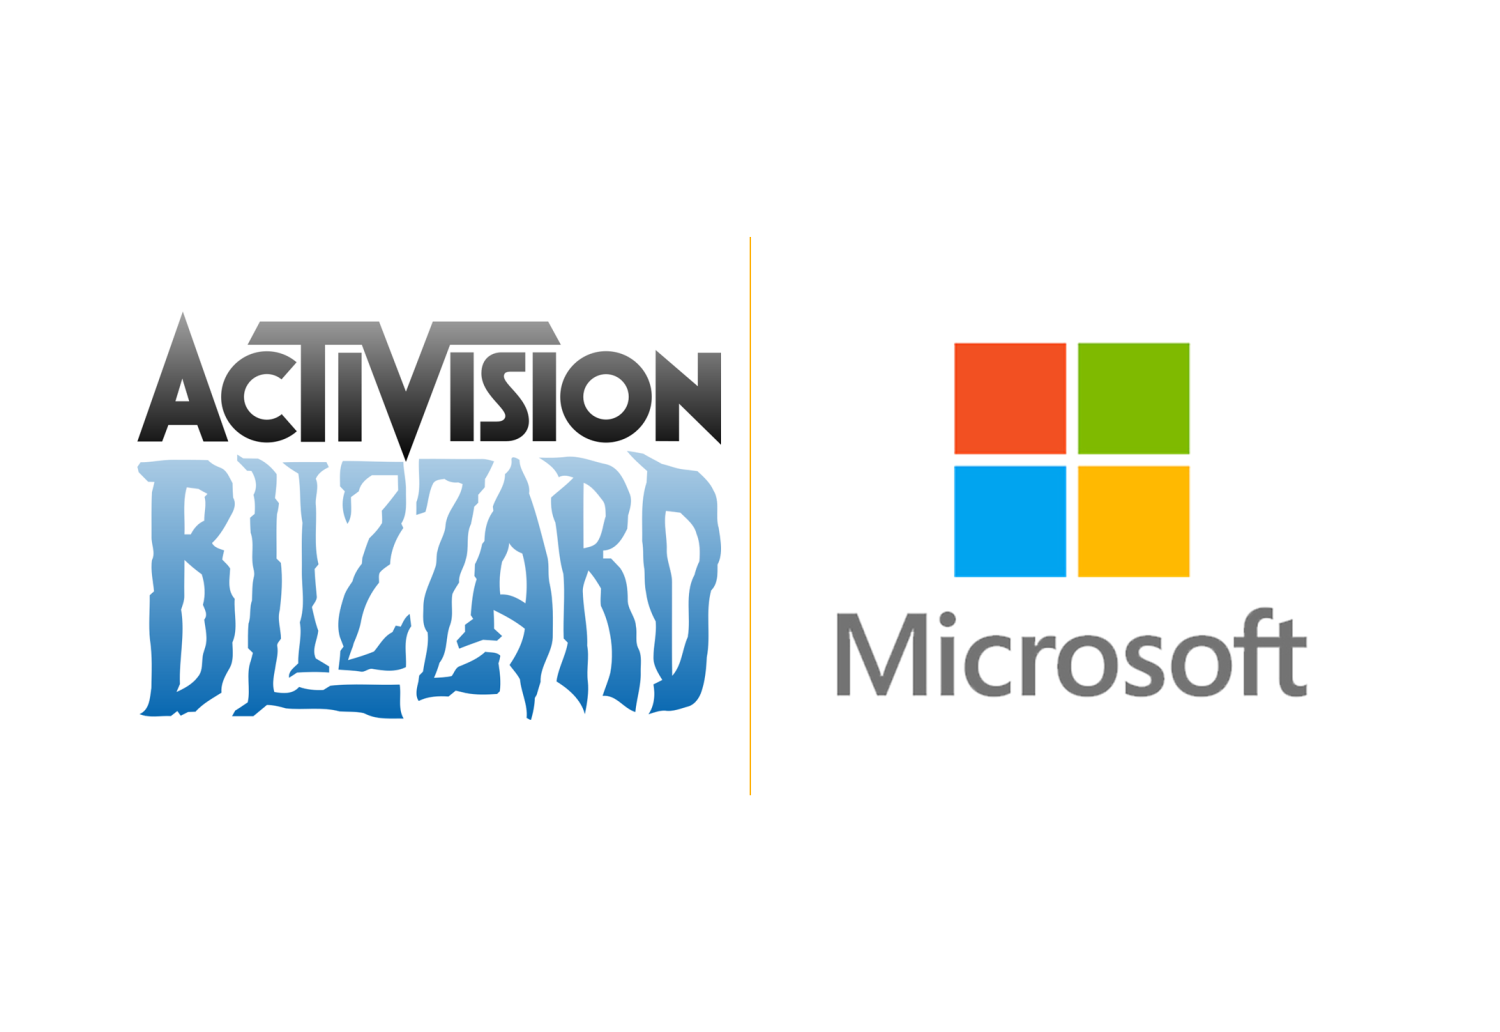 Microsoft's Activision Blizzard acquisition approved by EU